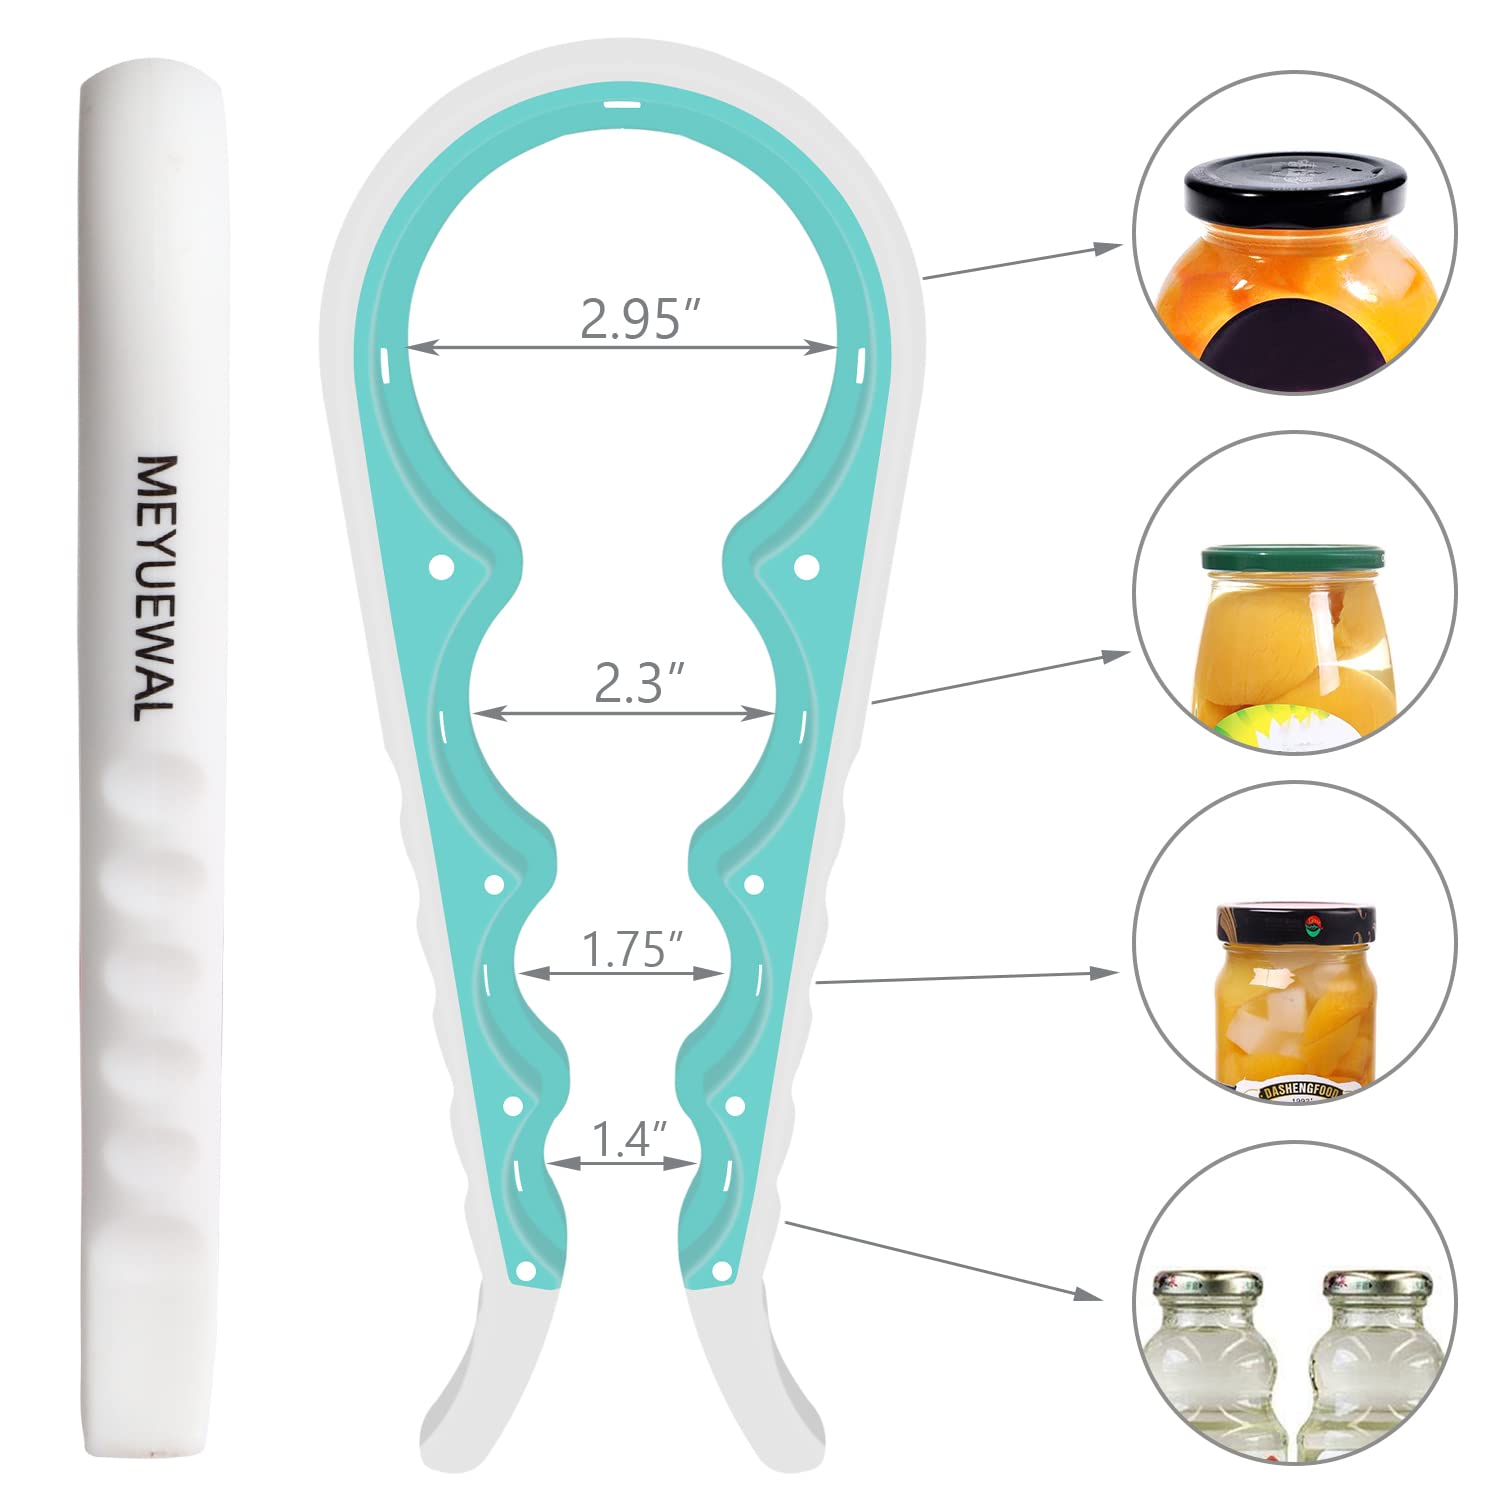 MEYUEWAL Jar Opener for Weak Hands - 5 in 1 Multi Function Can Opener Bottle Opener Kit with Silicone Handle Easy to Use for Children, Elderly and Arthritis Sufferers (White Green）